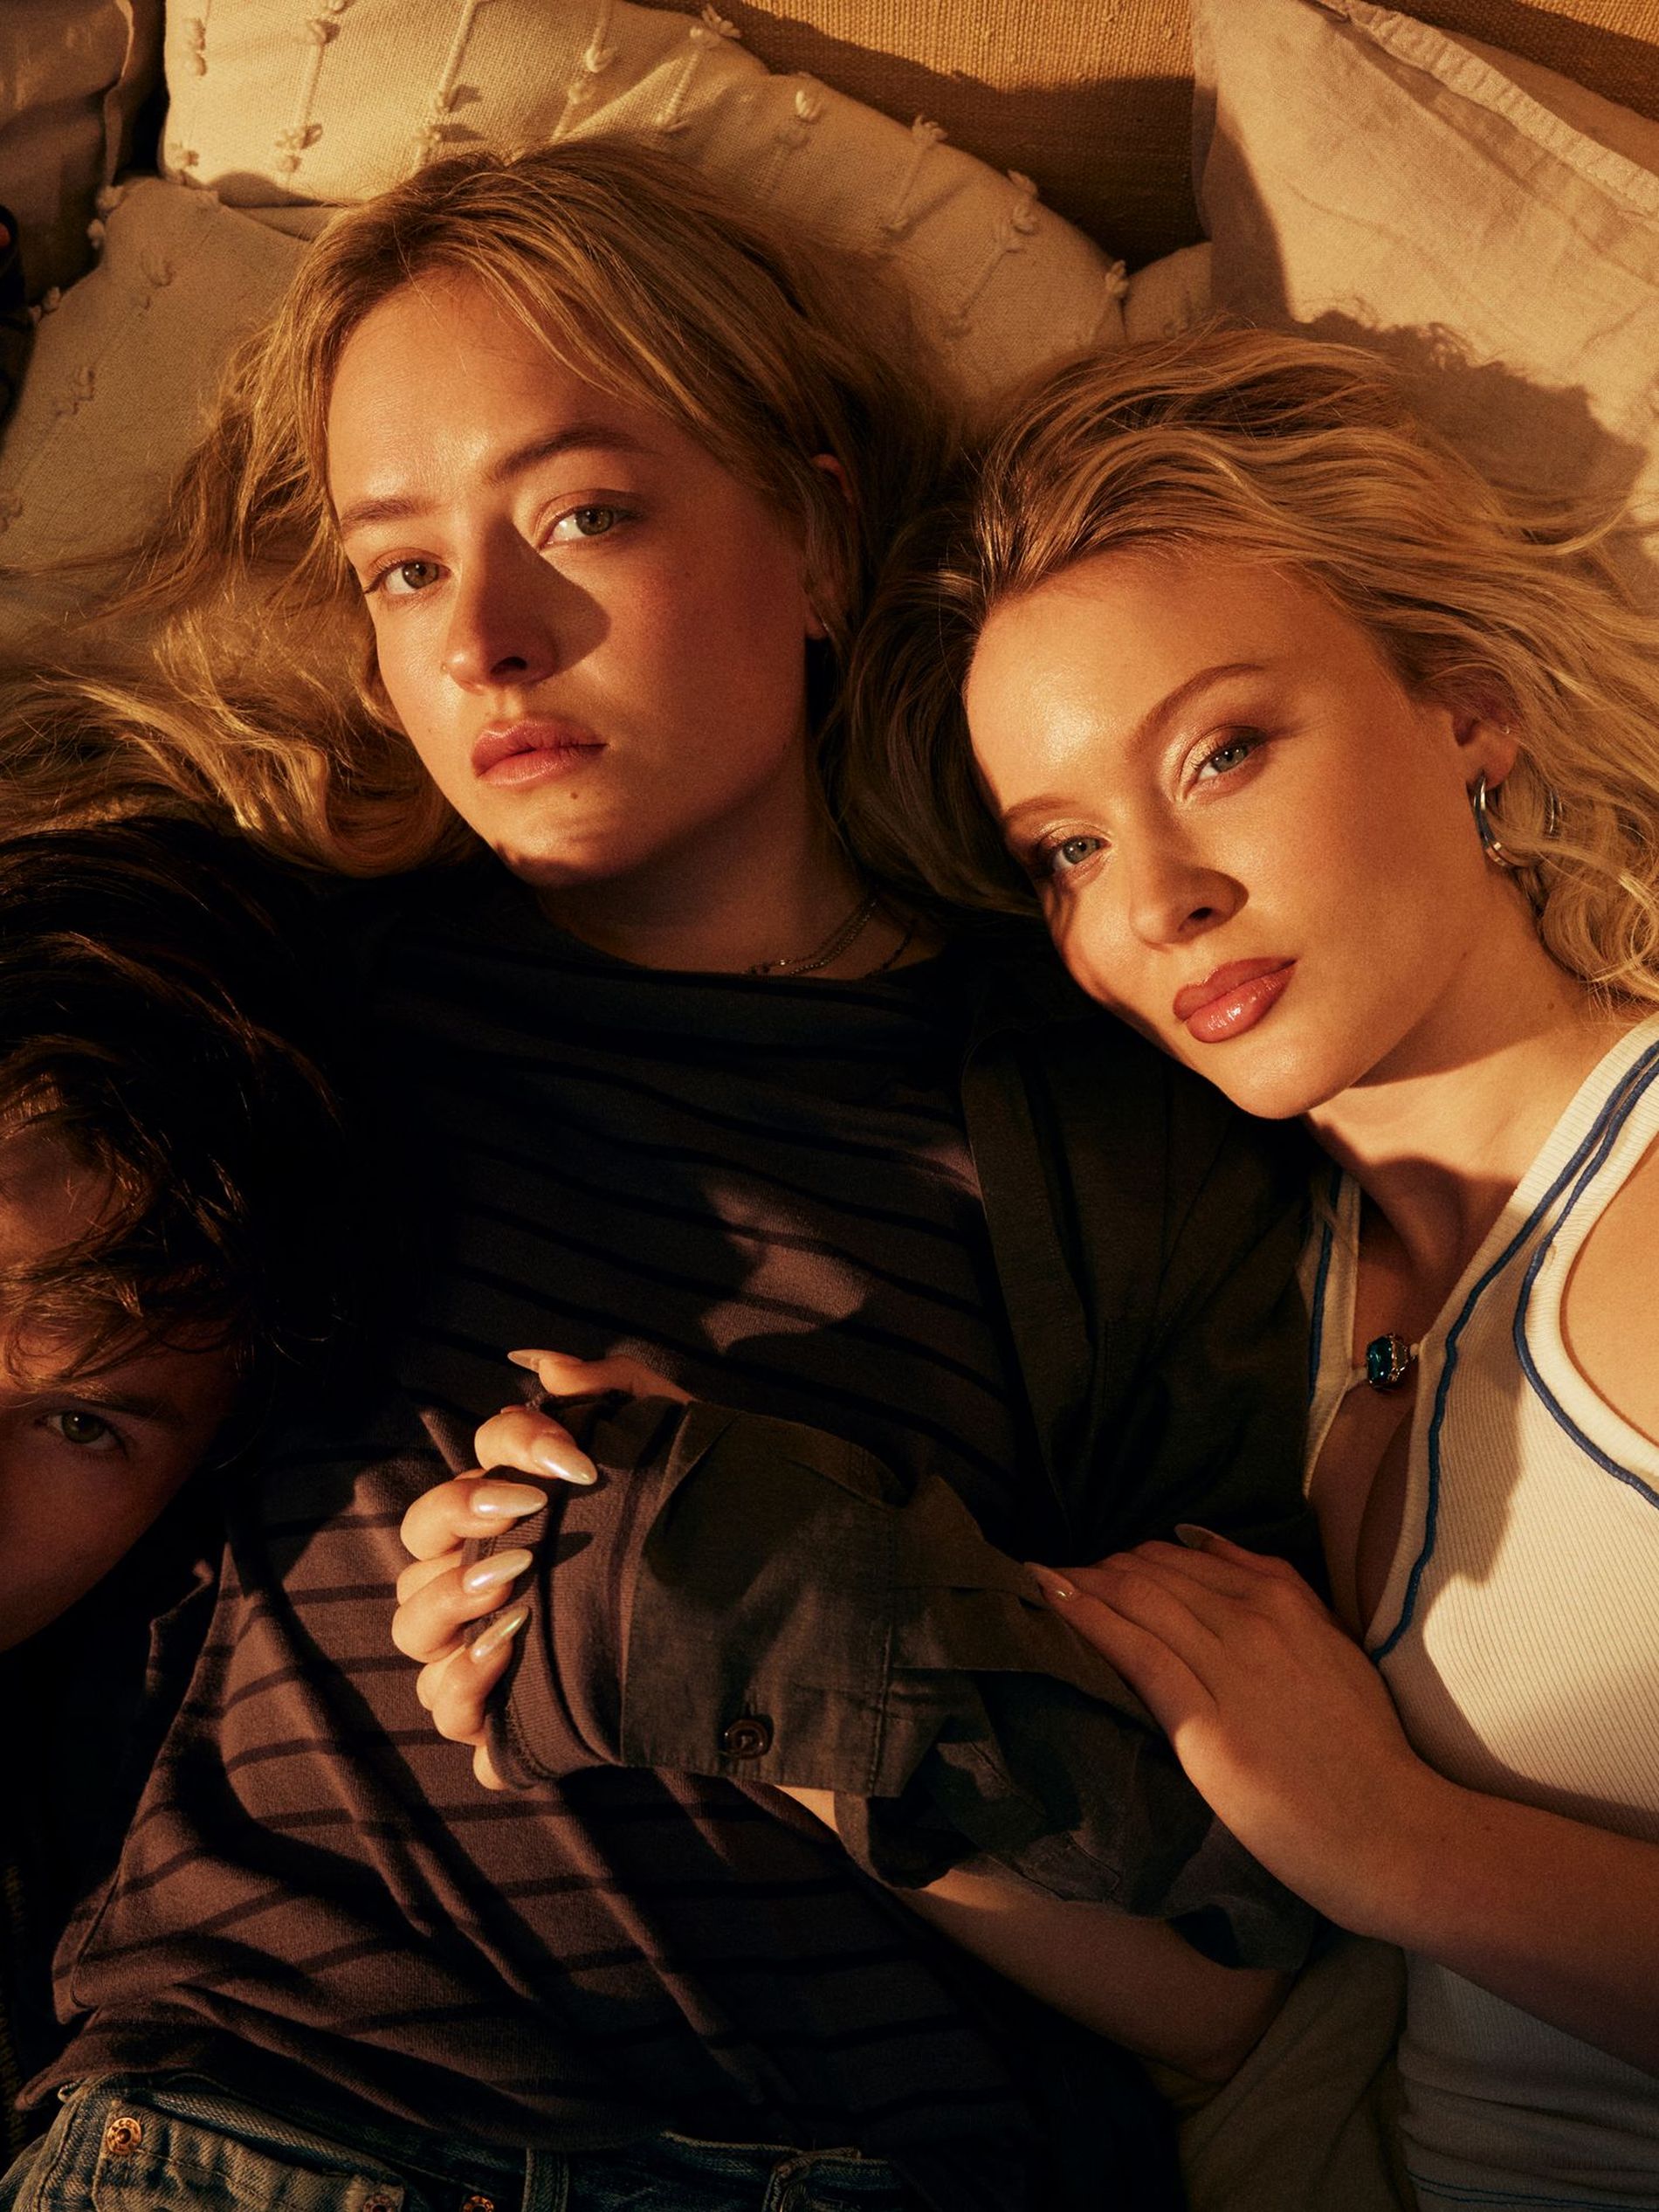 First look at Zara Larsson's acting debut in Netflix movie with